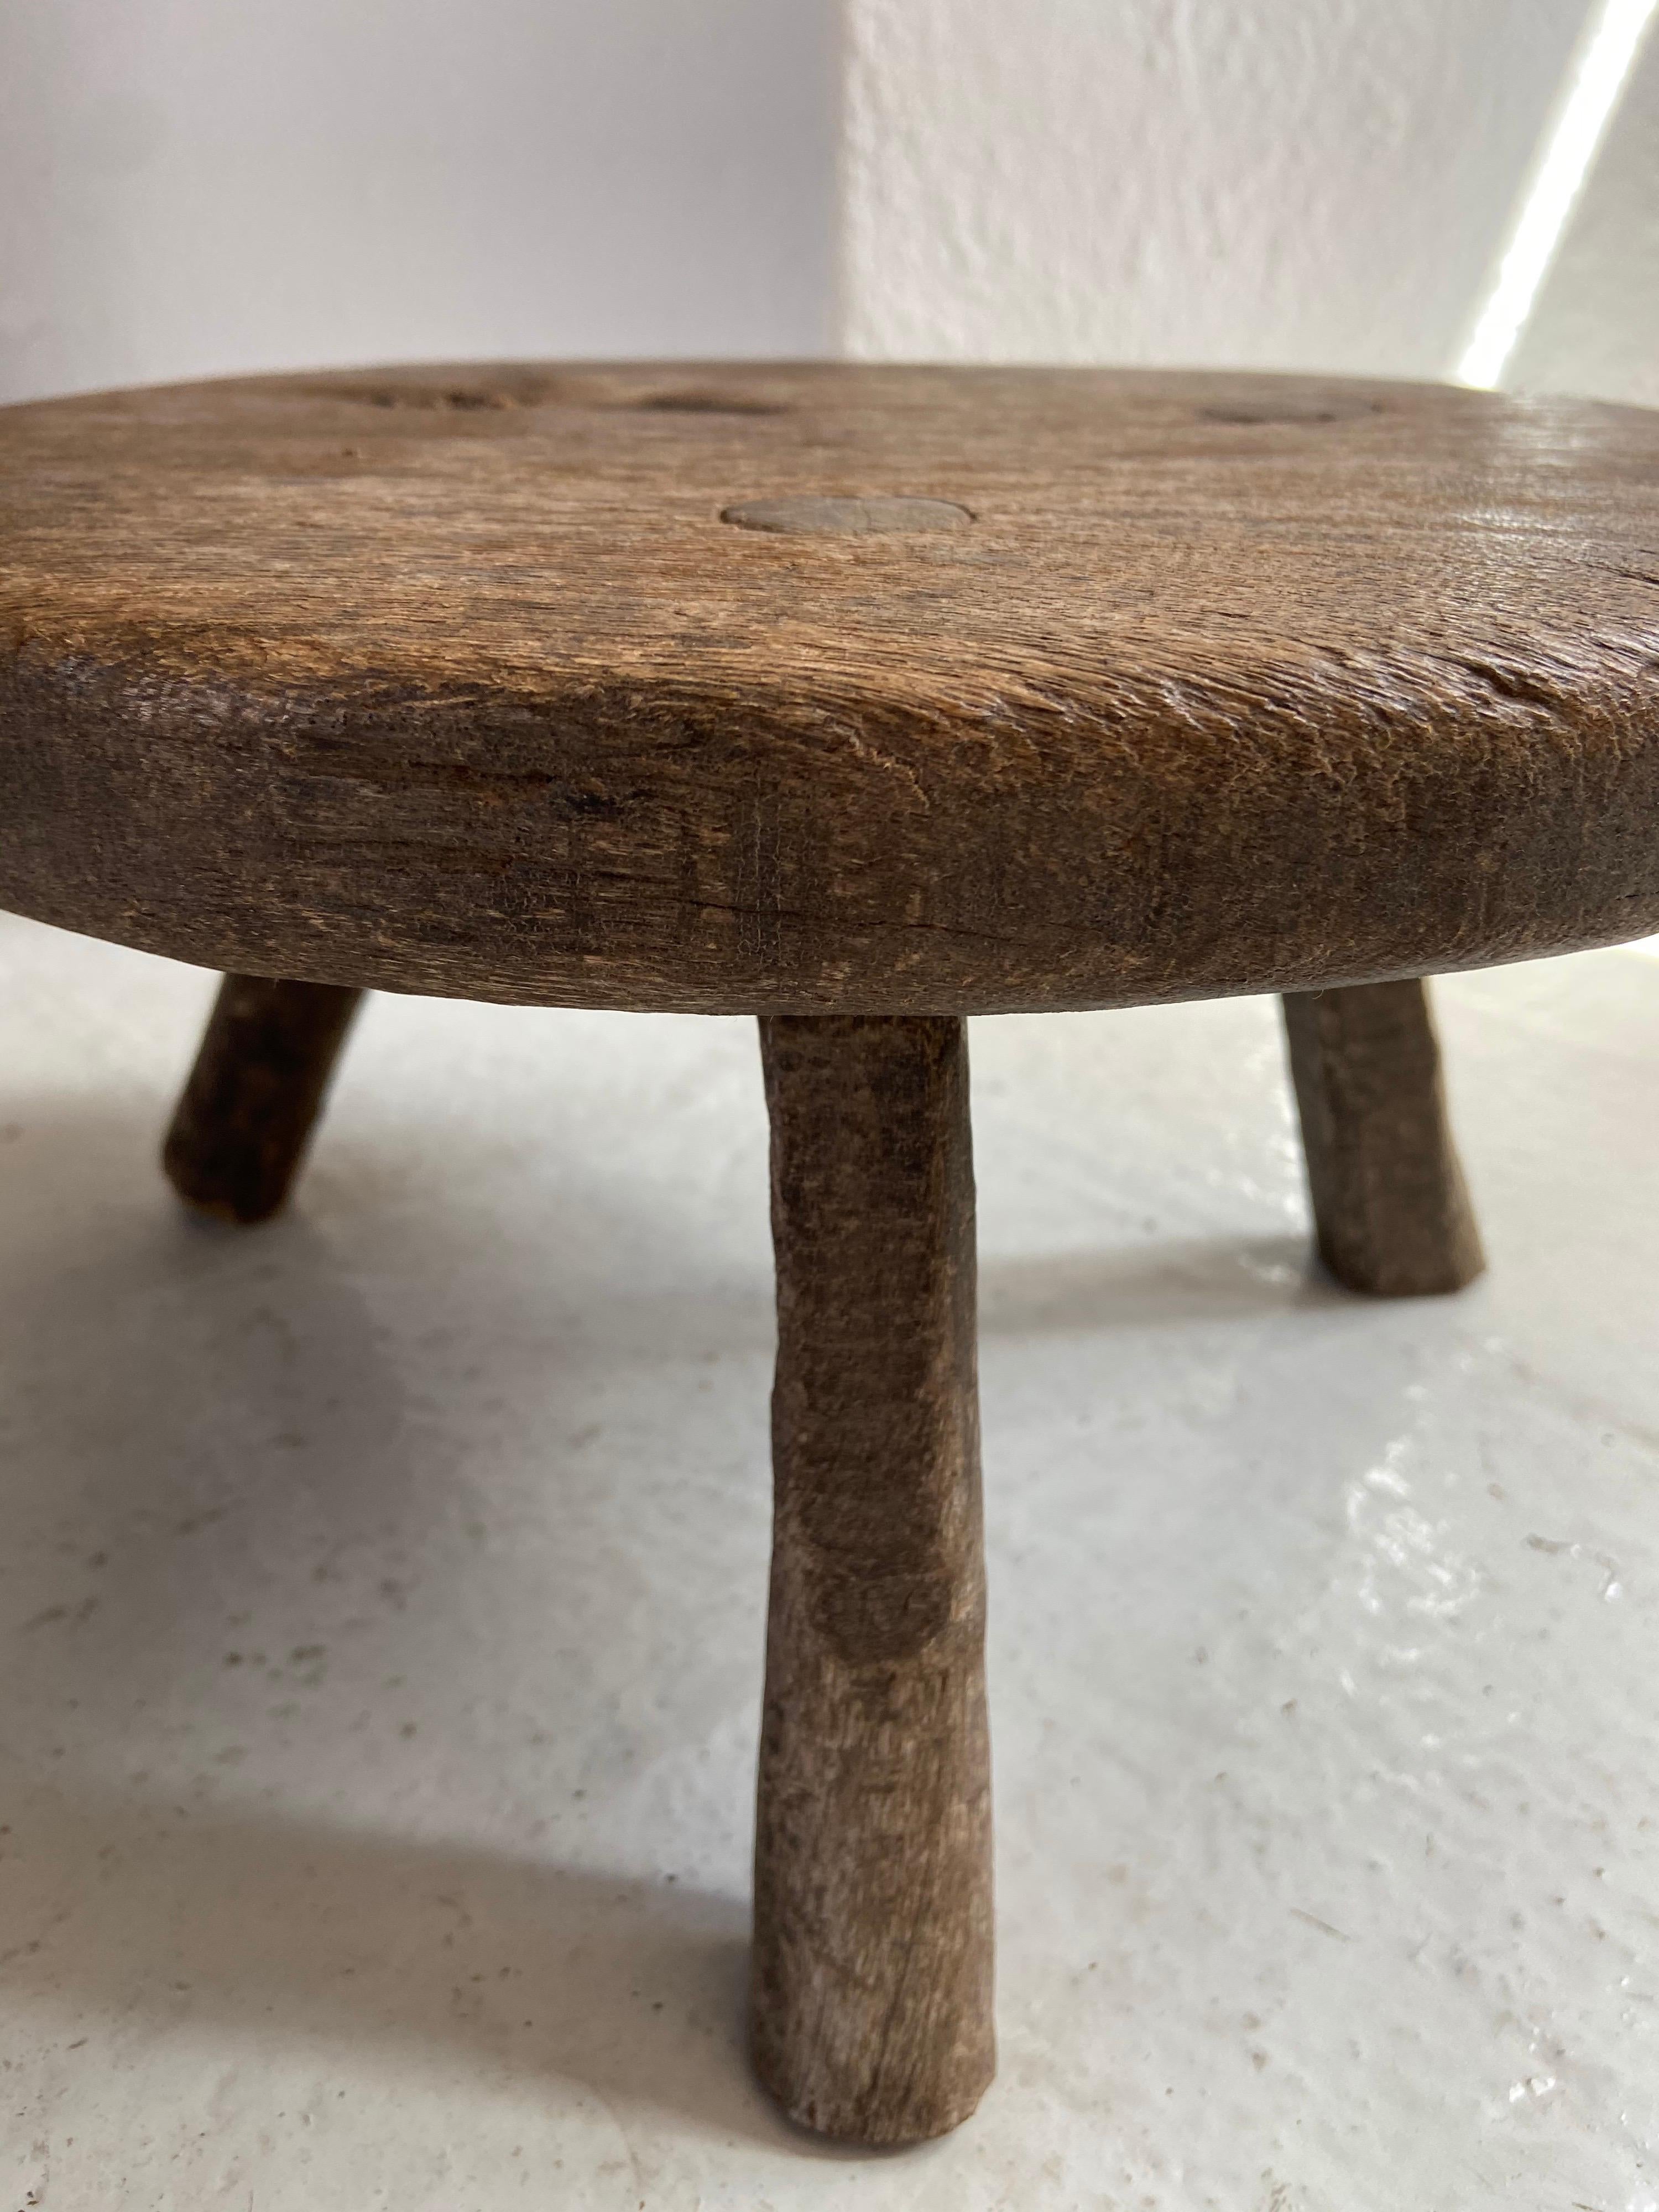 Hand-Carved Mid-20th Century Mesquite Stool from Mexico